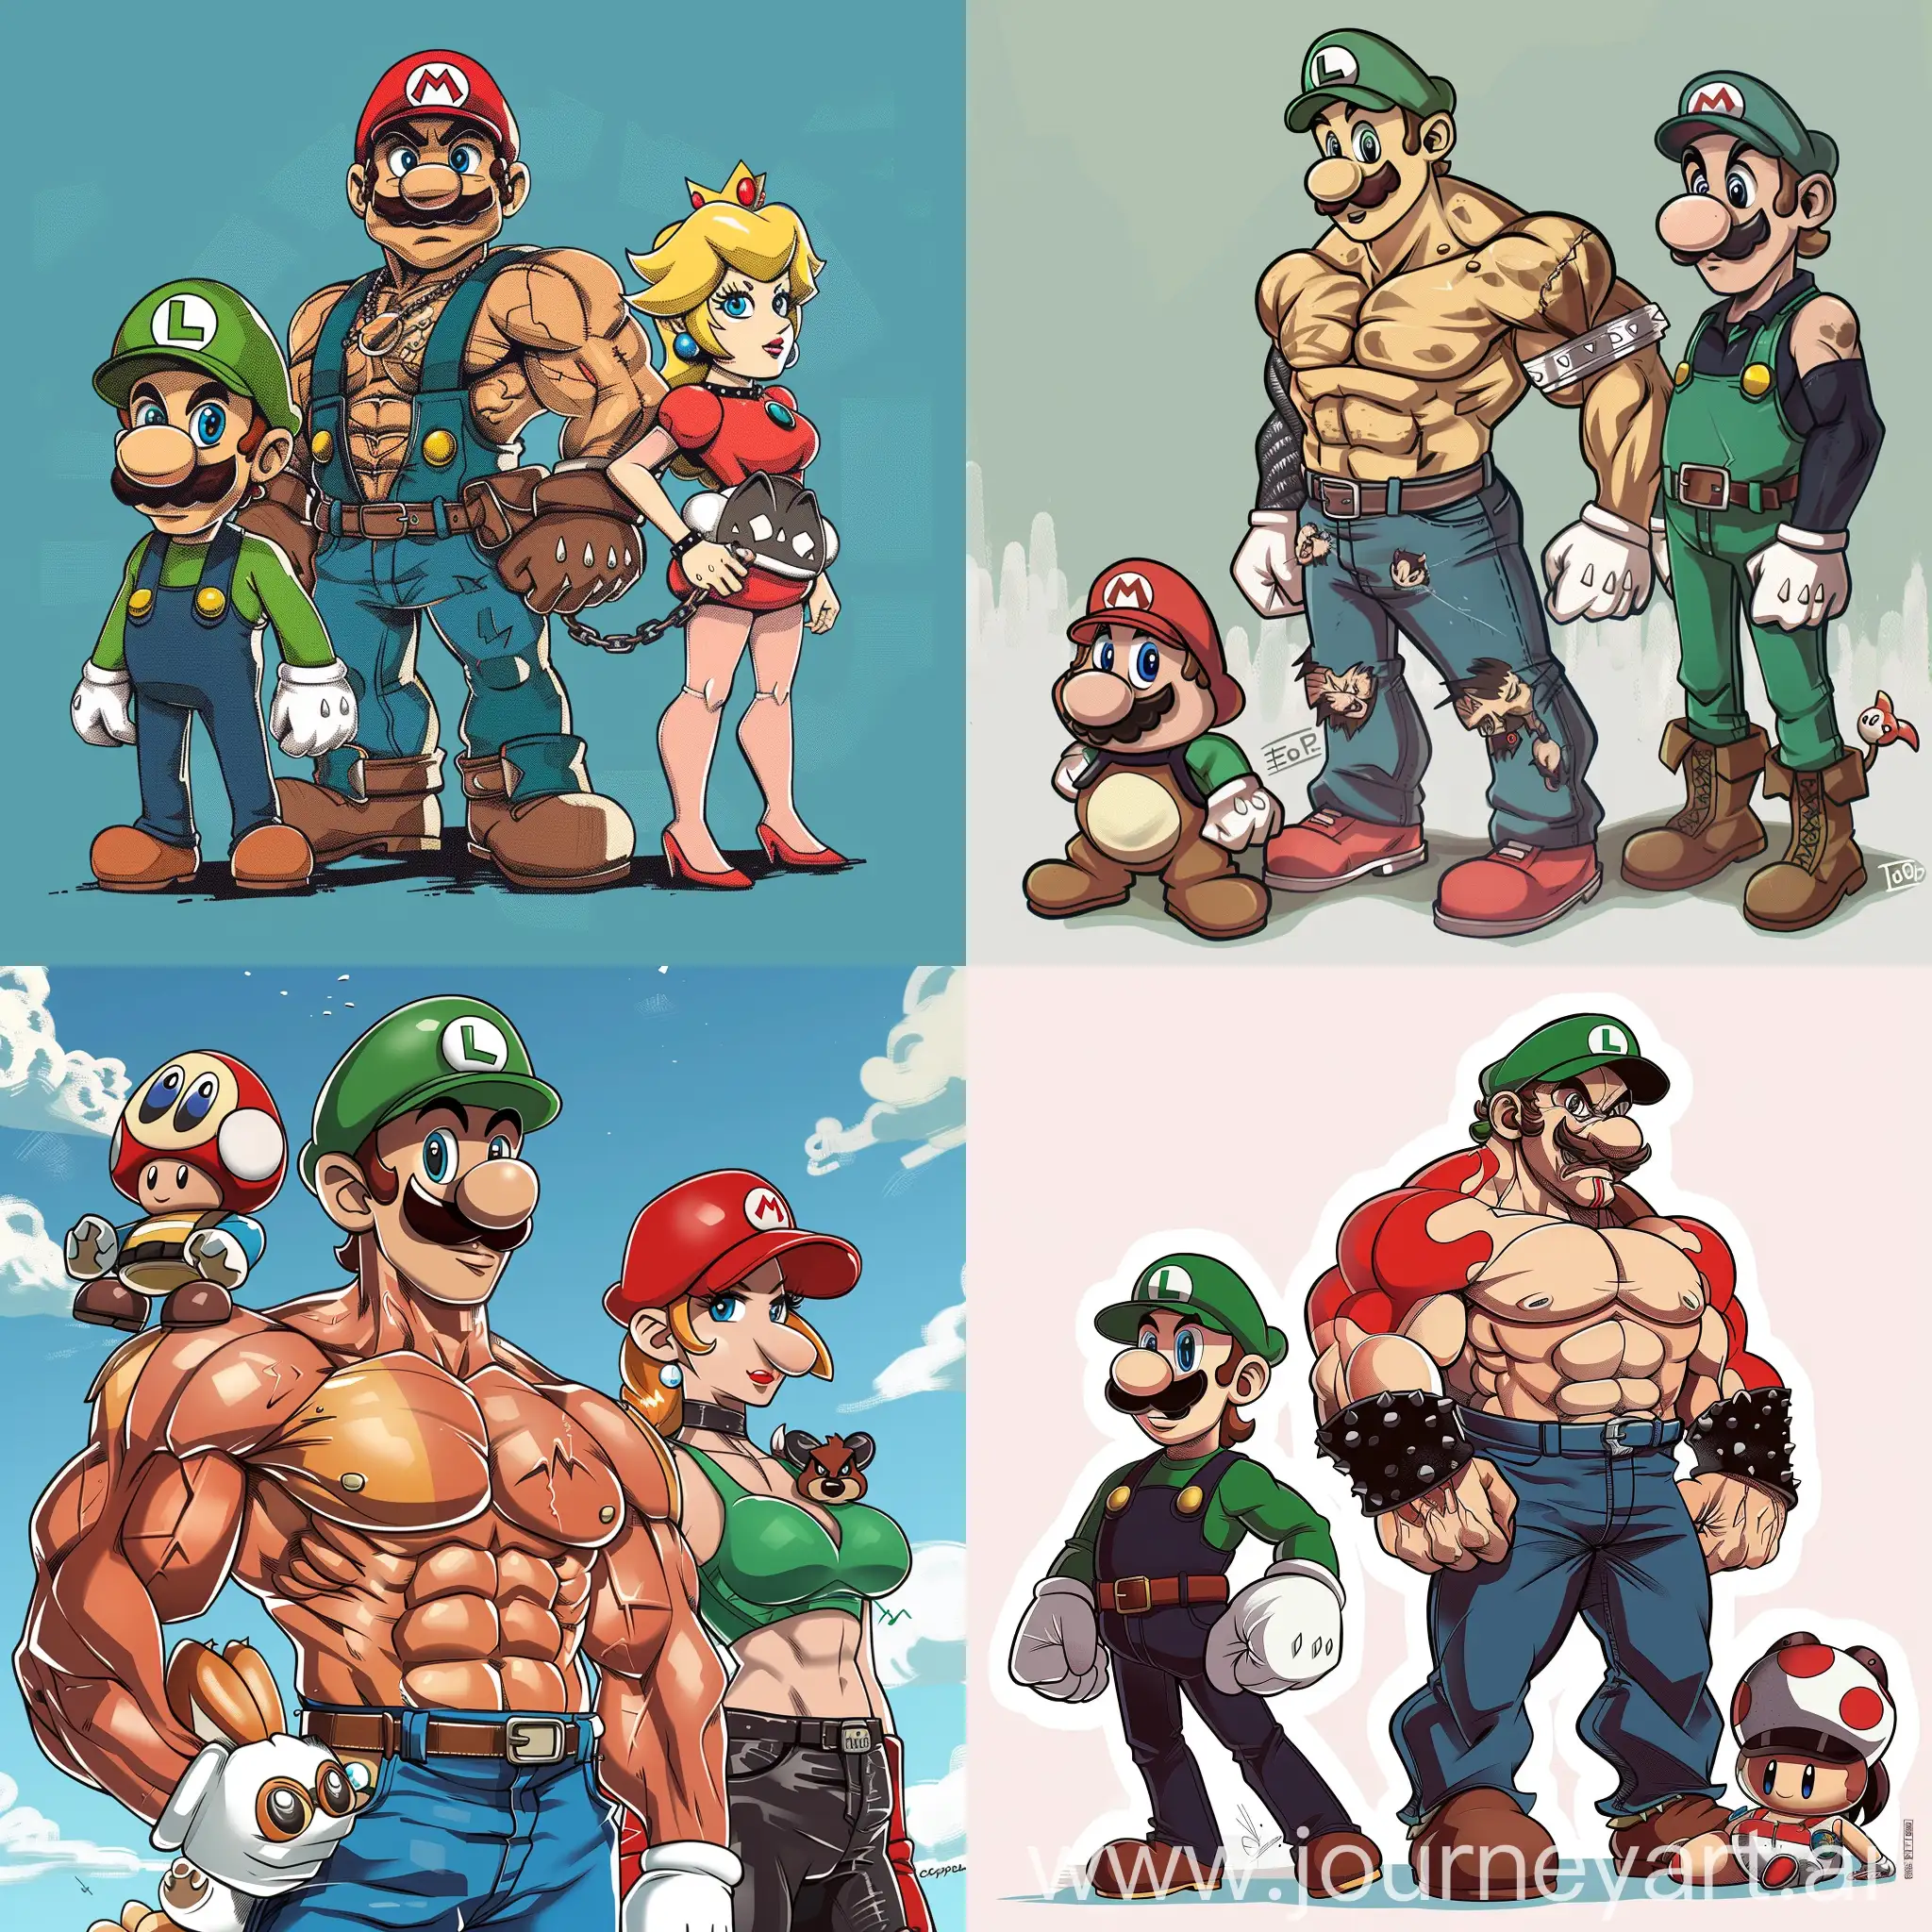 Mario as a muscle daddy, Luigi as a muscle pup,
Peach as a leather man and Toad as an Omega Pup